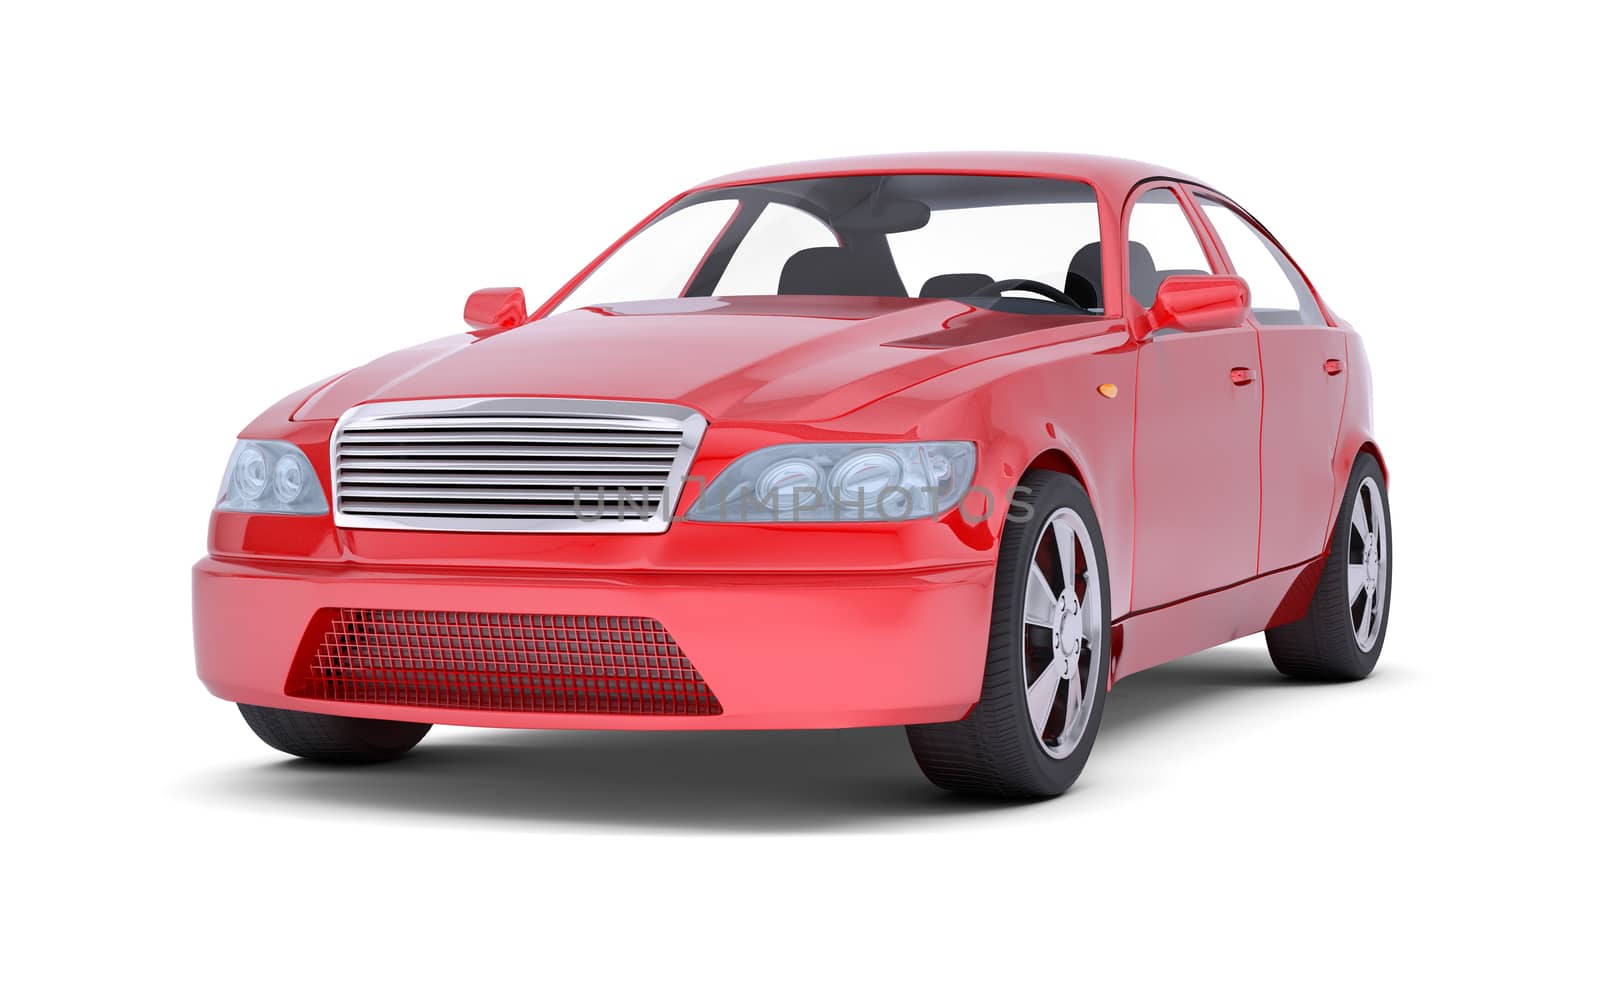 Image of red car on isolated white background, front view